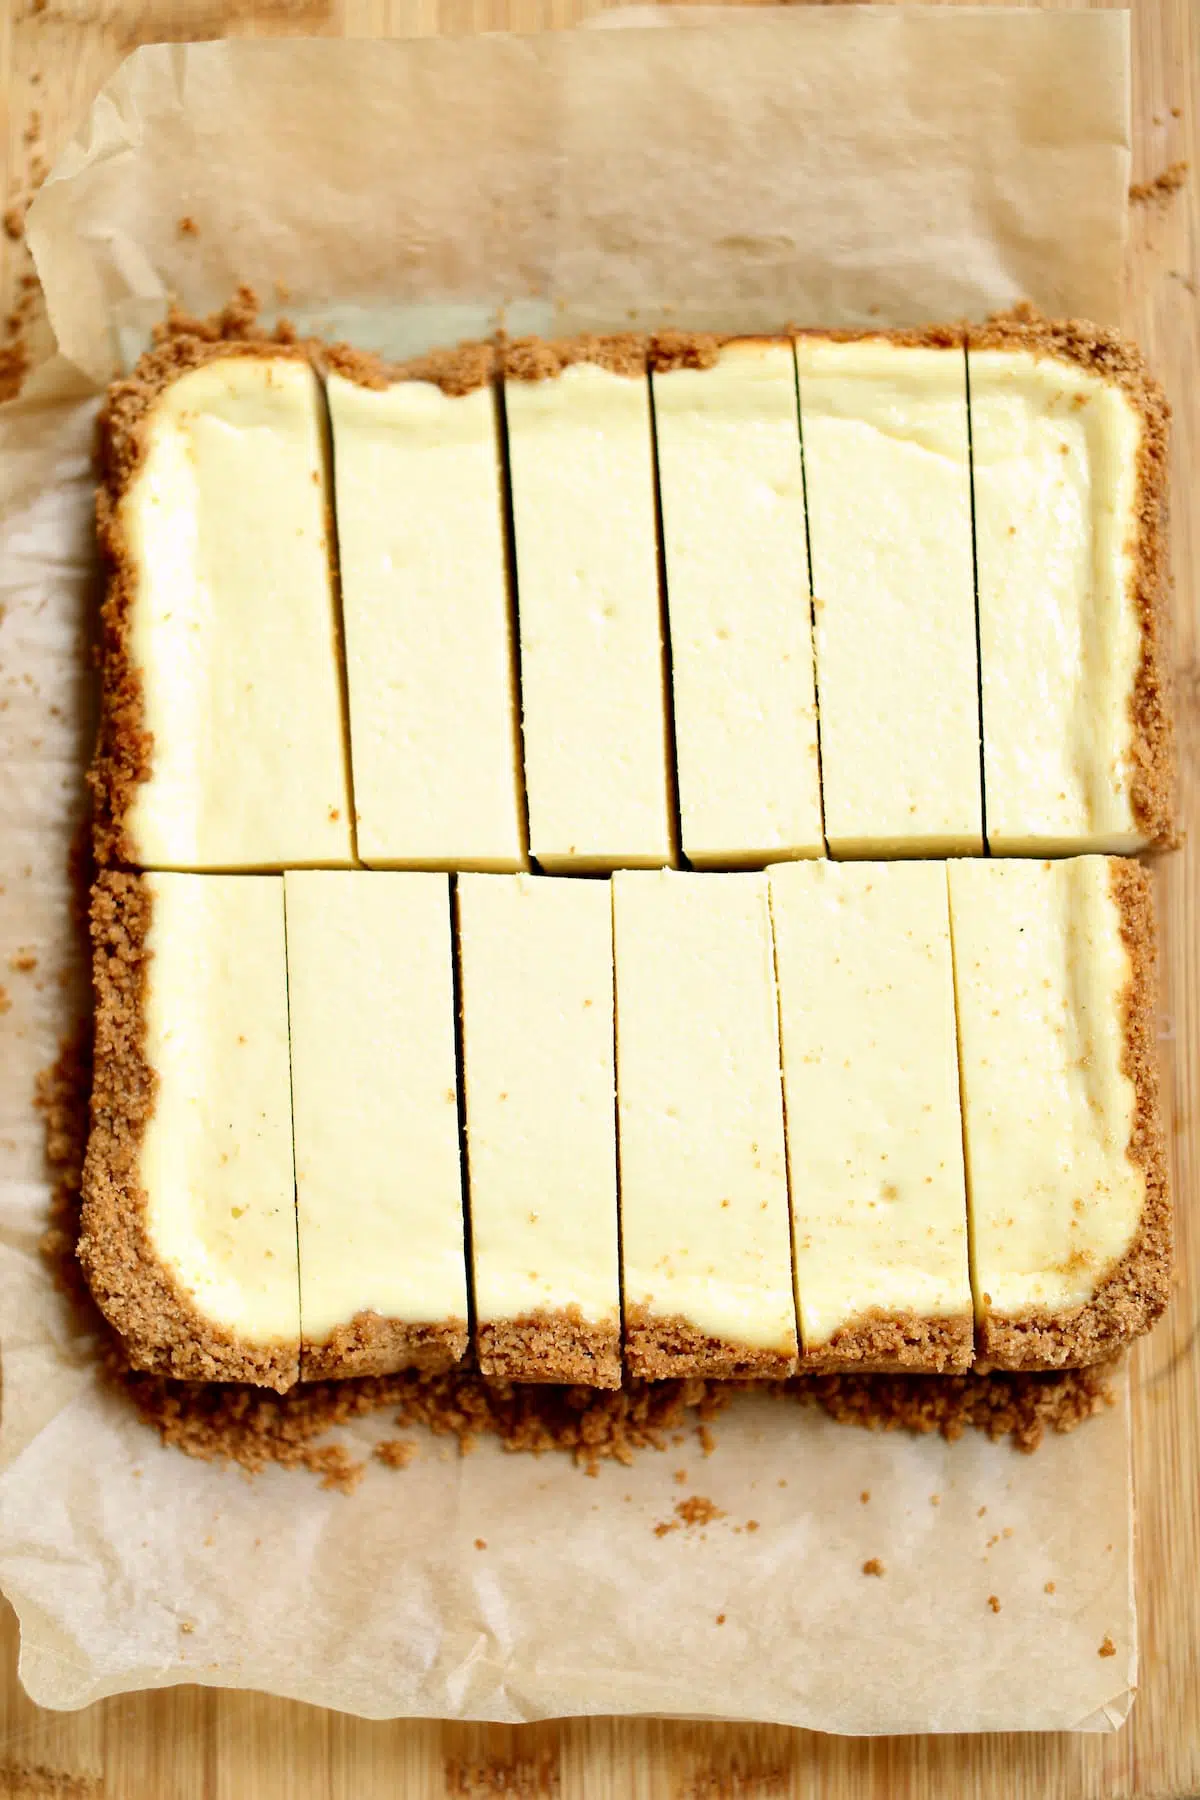 a square cheeecake cut into 12 long pieces.